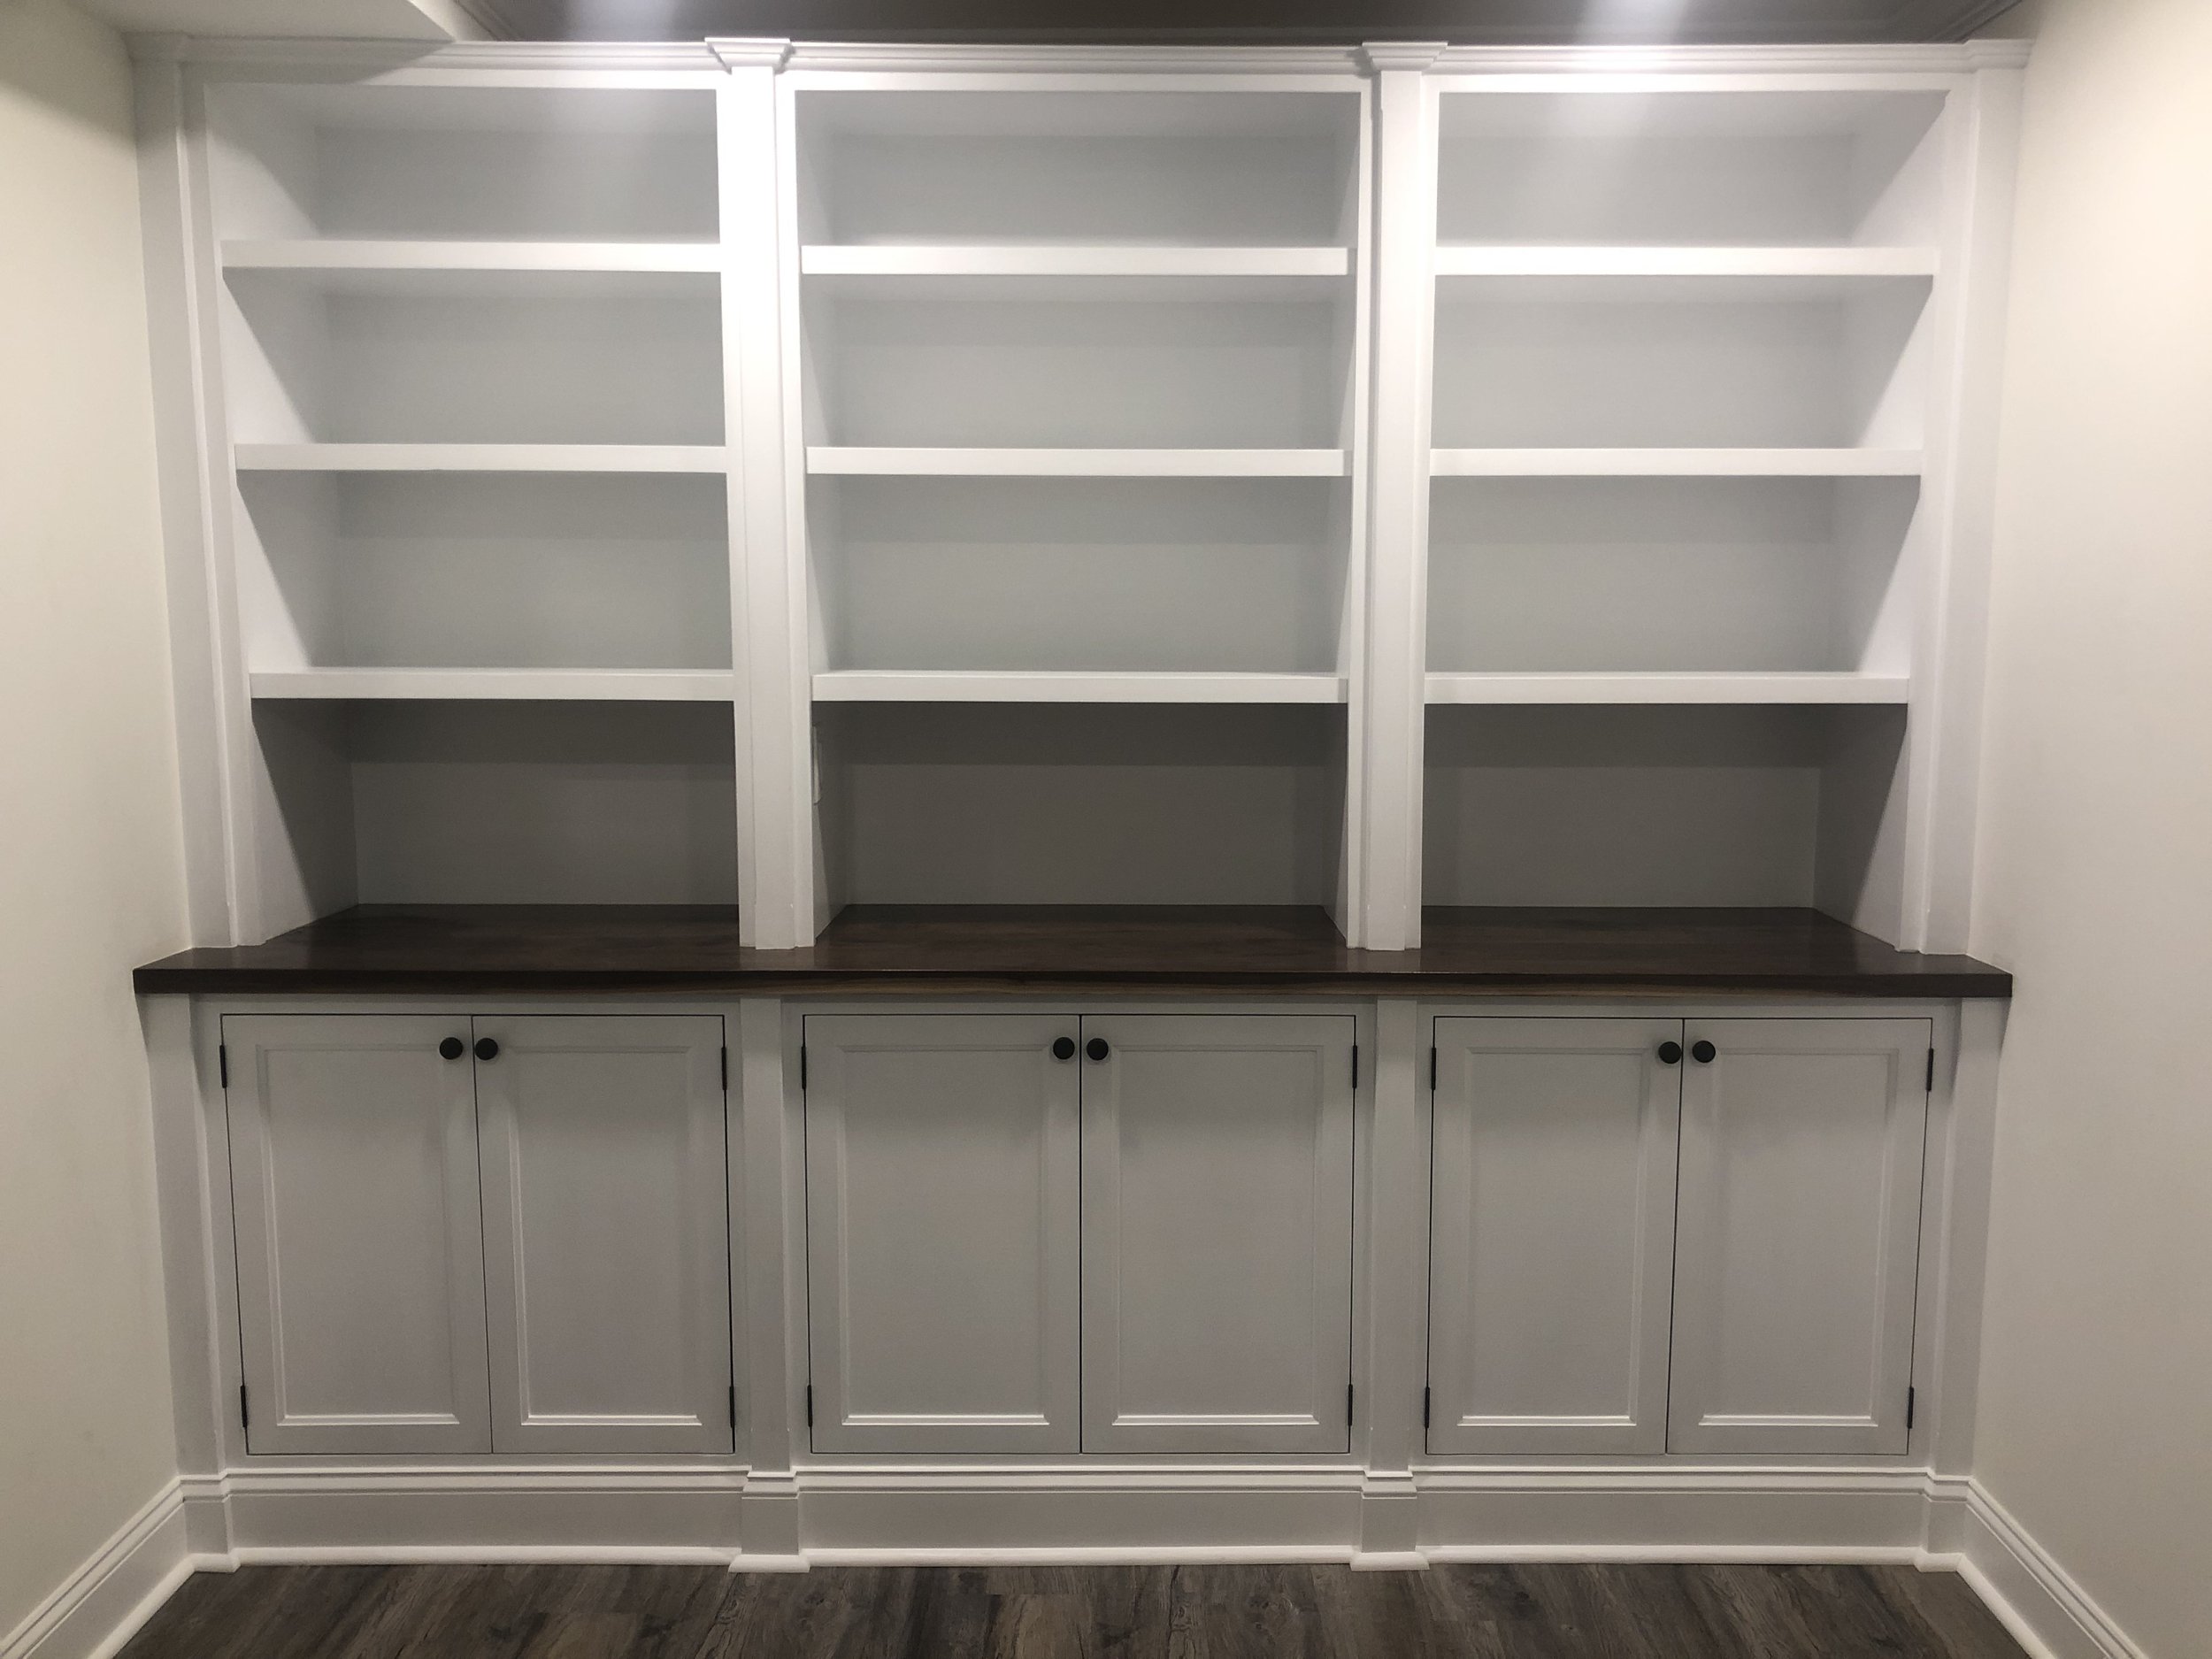  The finished product features inset flat-panel doors, a black walnut countertop, and a pull-out shelf inside the lower center cabinet. 